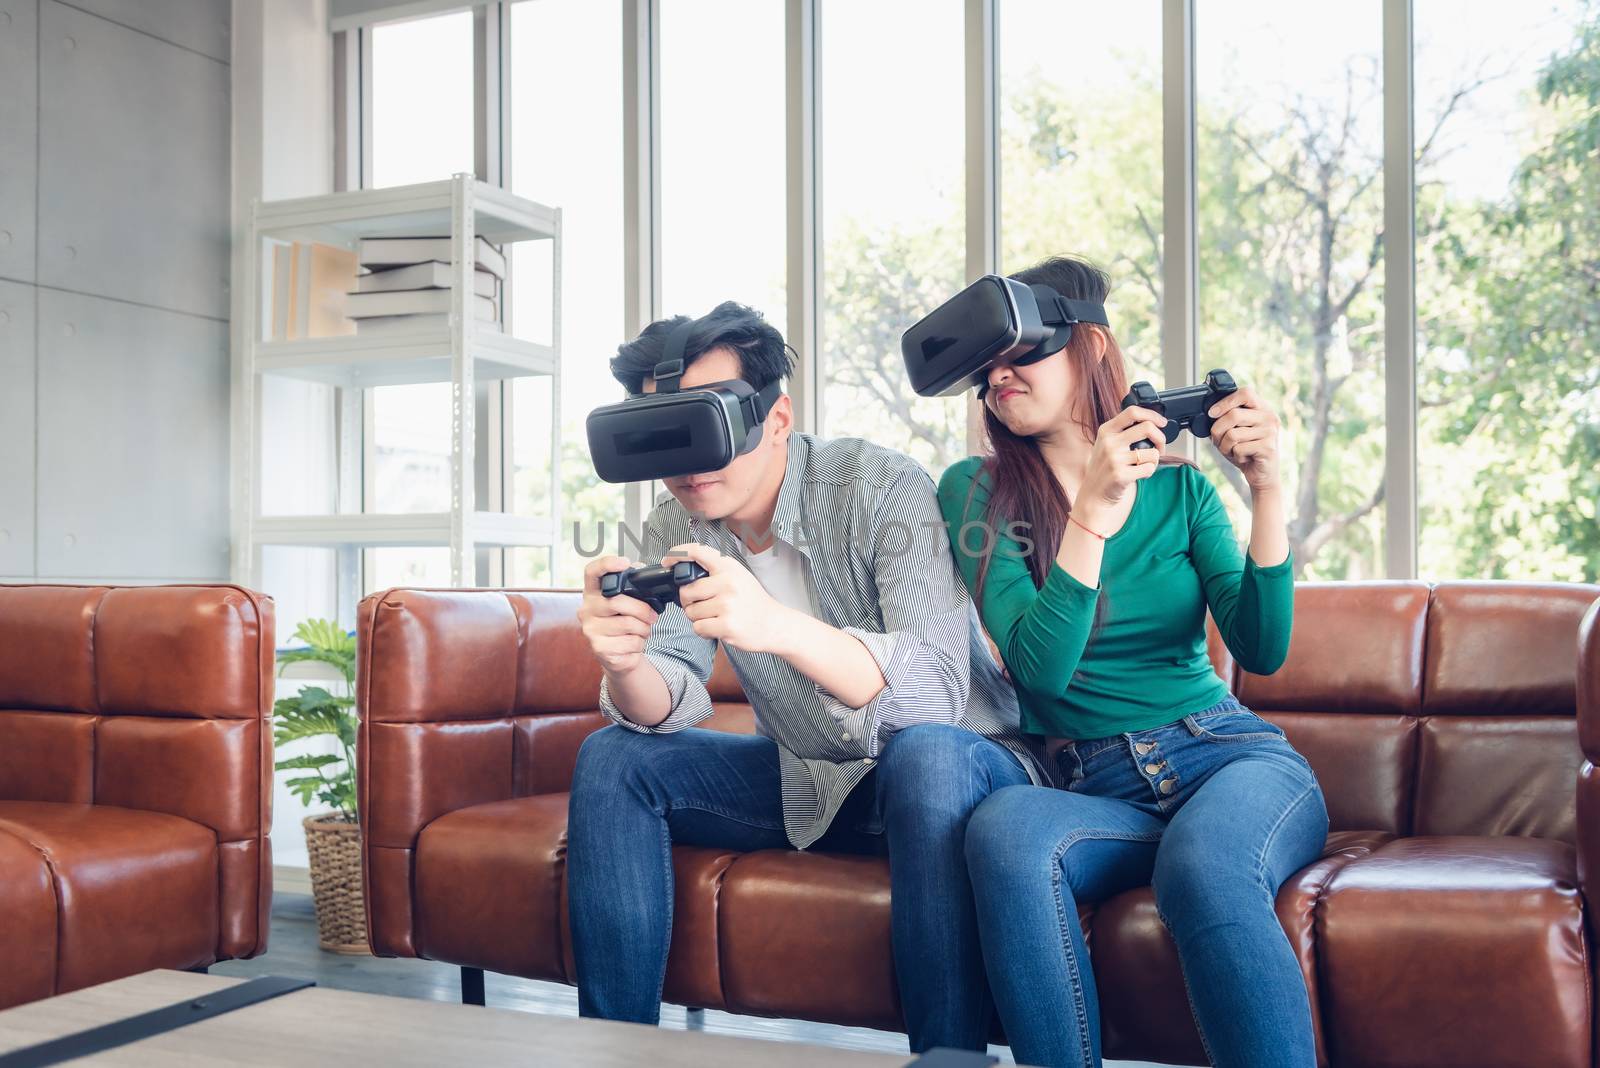 Young Couple Having Fun While Playing Virtual Reality Game Together in Their Home. Couple Love Having Enjoyment With Electronic VR Goggles Gaming on Couch. Entertainment Innovation/Lifestyles Concept by MahaHeang245789